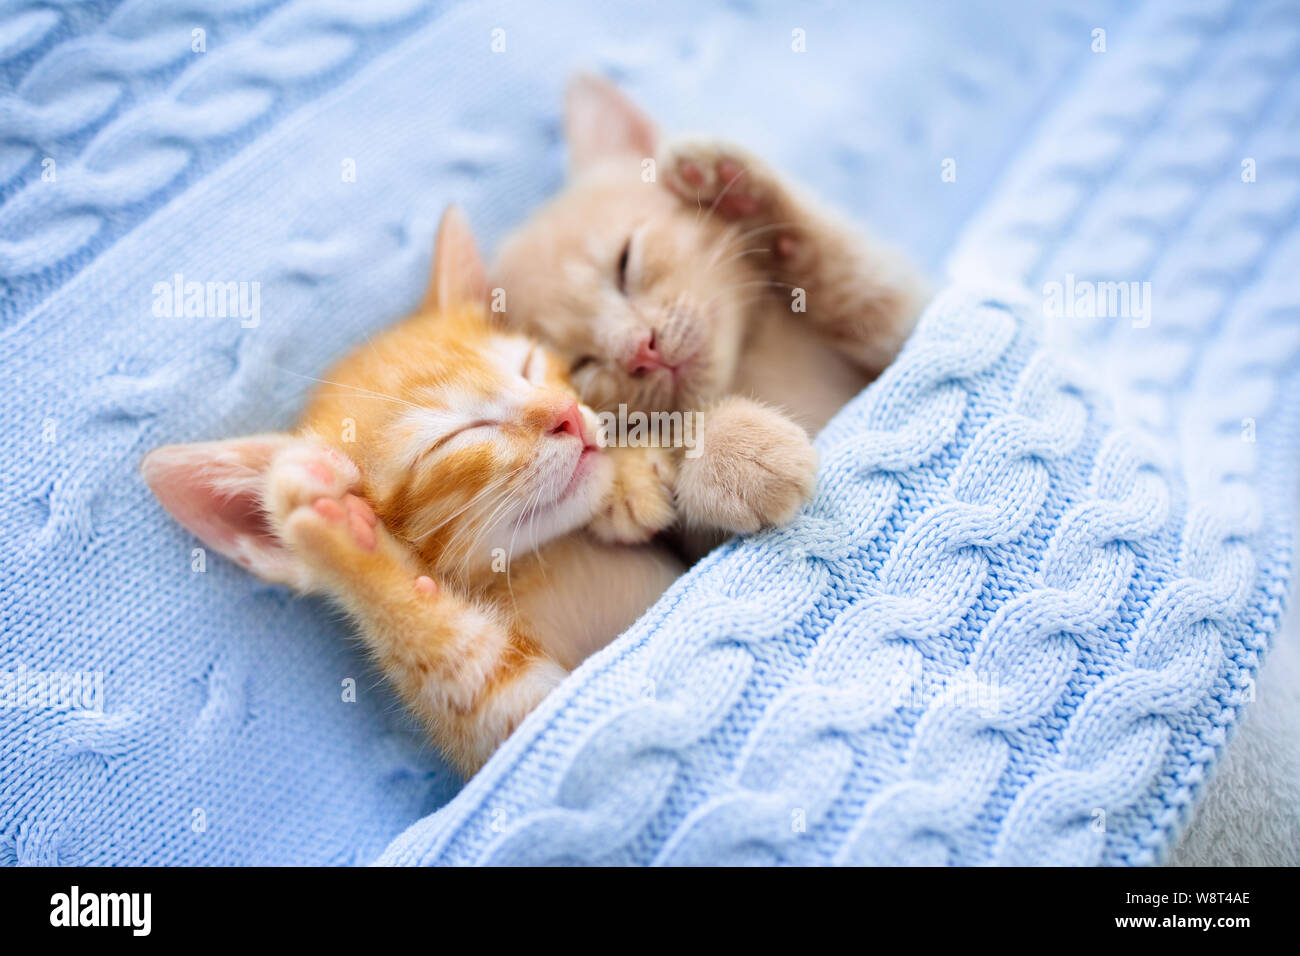 Baby cat sleeping. Ginger kitten on couch under knitted blanket. Two cats cuddling and hugging. Domestic animal. Sleep and cozy nap time. Home pet. Yo Stock Photo